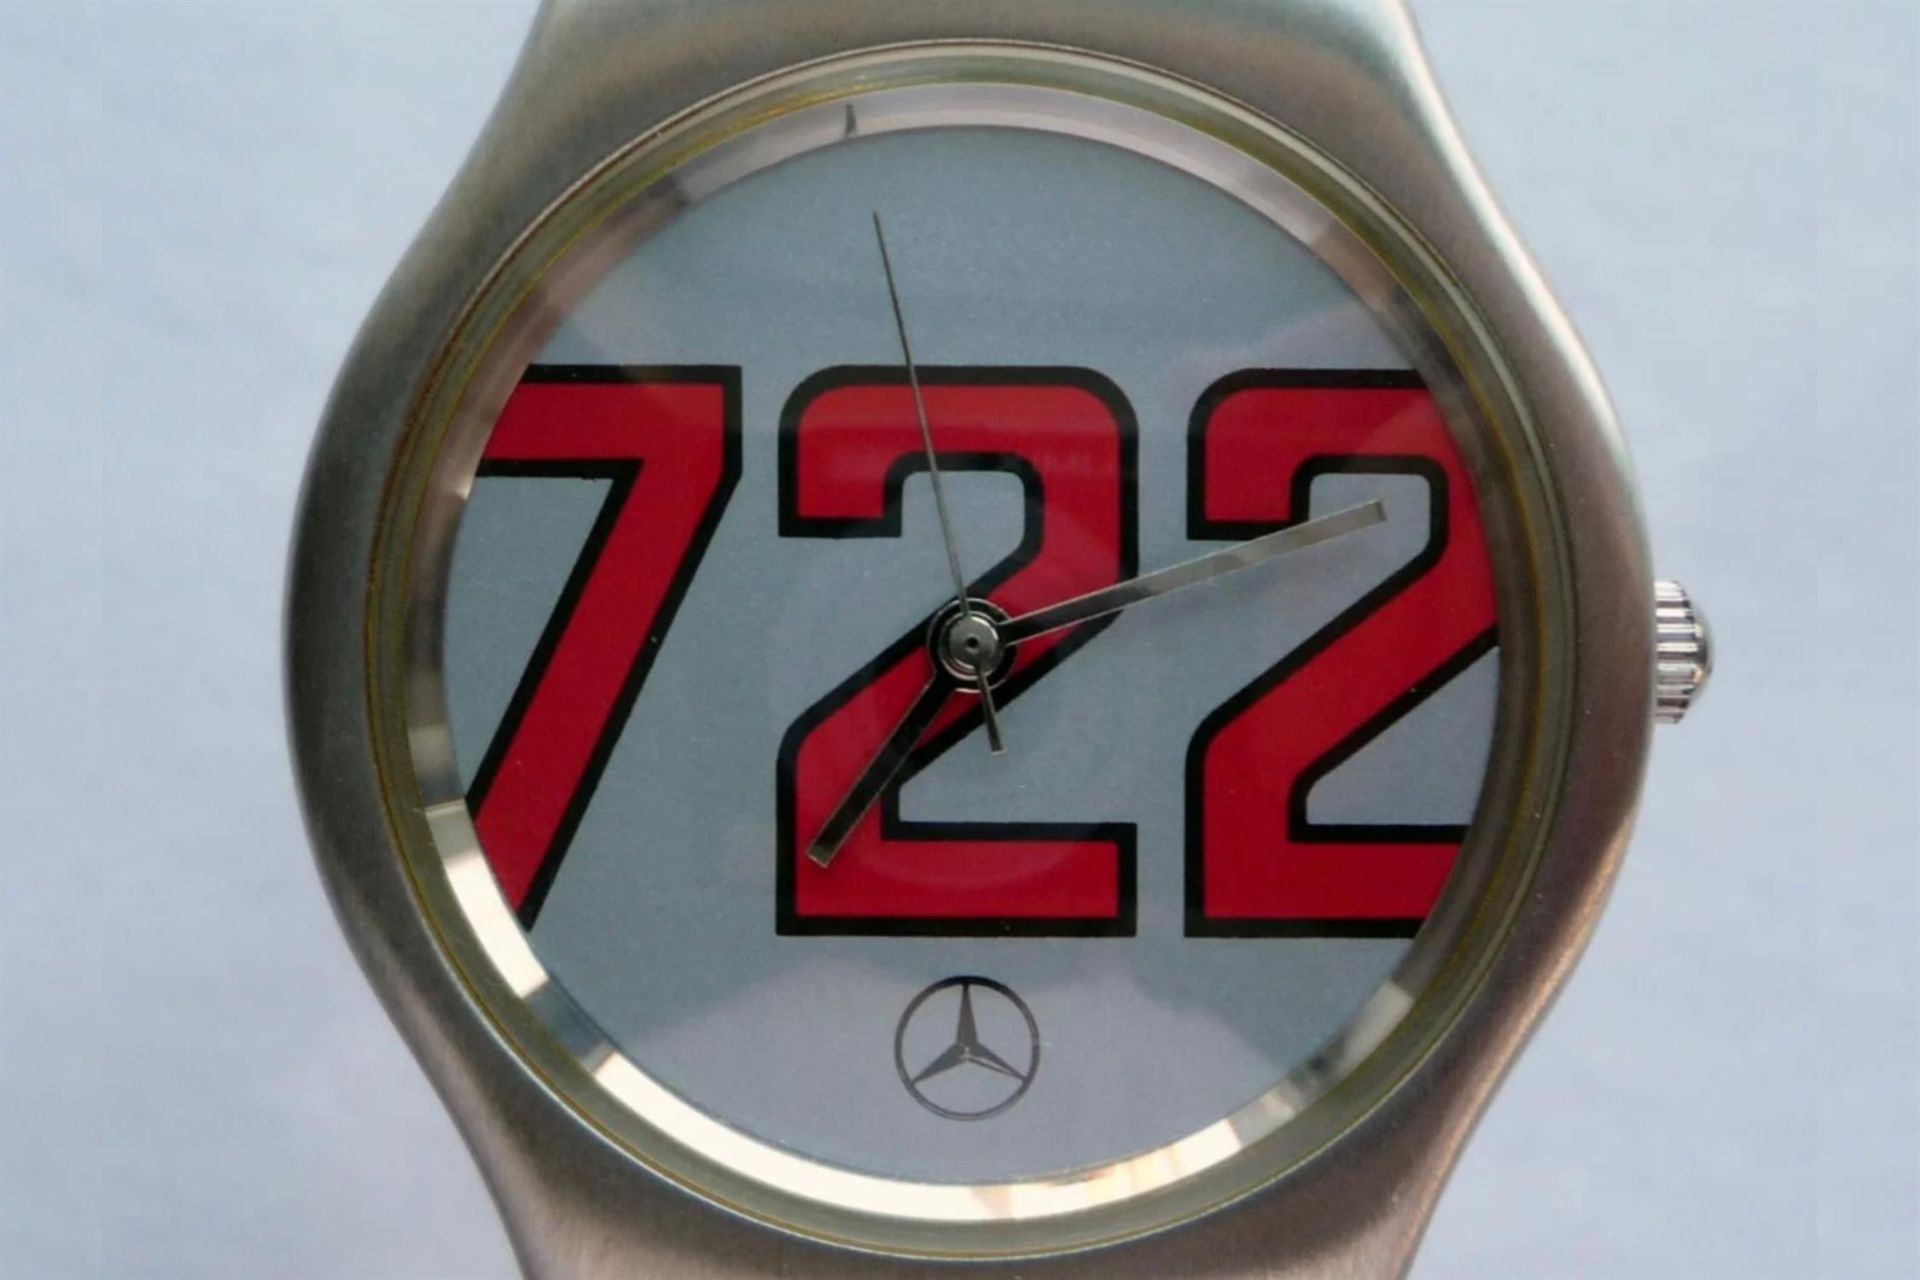 A Rare and Genuine Mercedes-Benz 722 Mille Miglia Classic Racing Watch